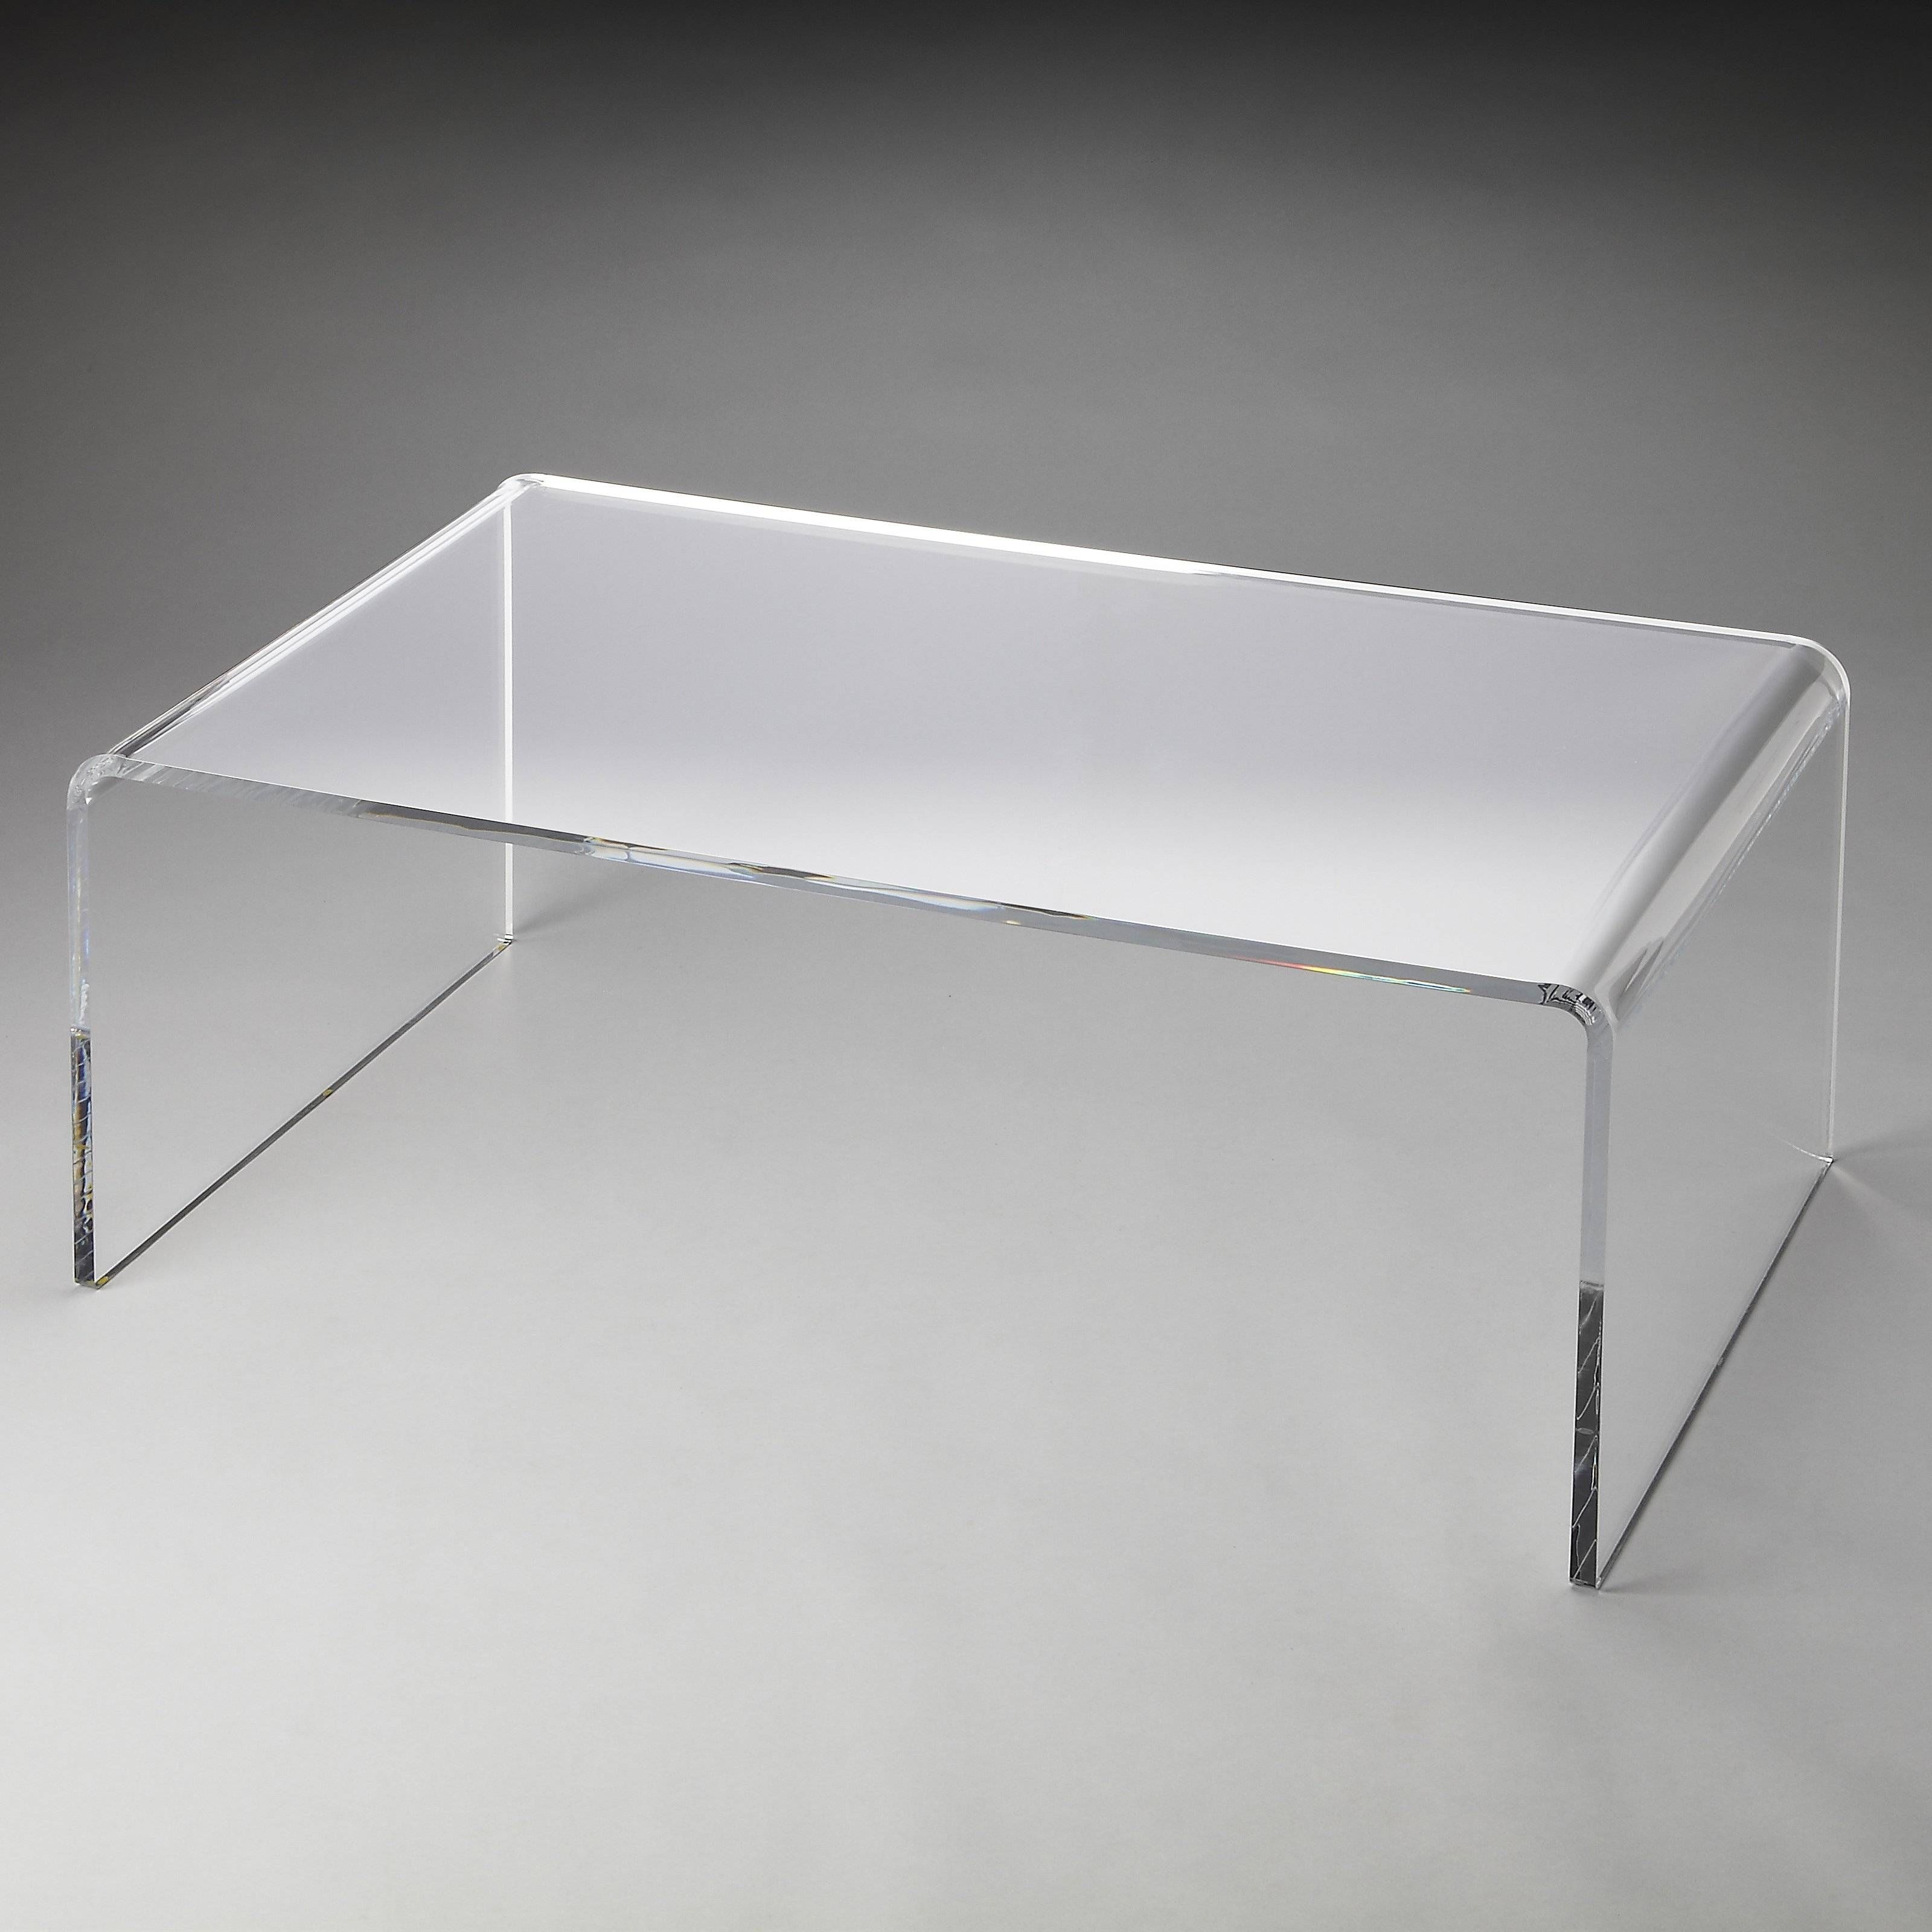 Modway Rectangle Clear Acrylic Coffee Table With Magazine Holder Intended For Acrylic Coffee Tables With Magazine Rack (View 20 of 30)